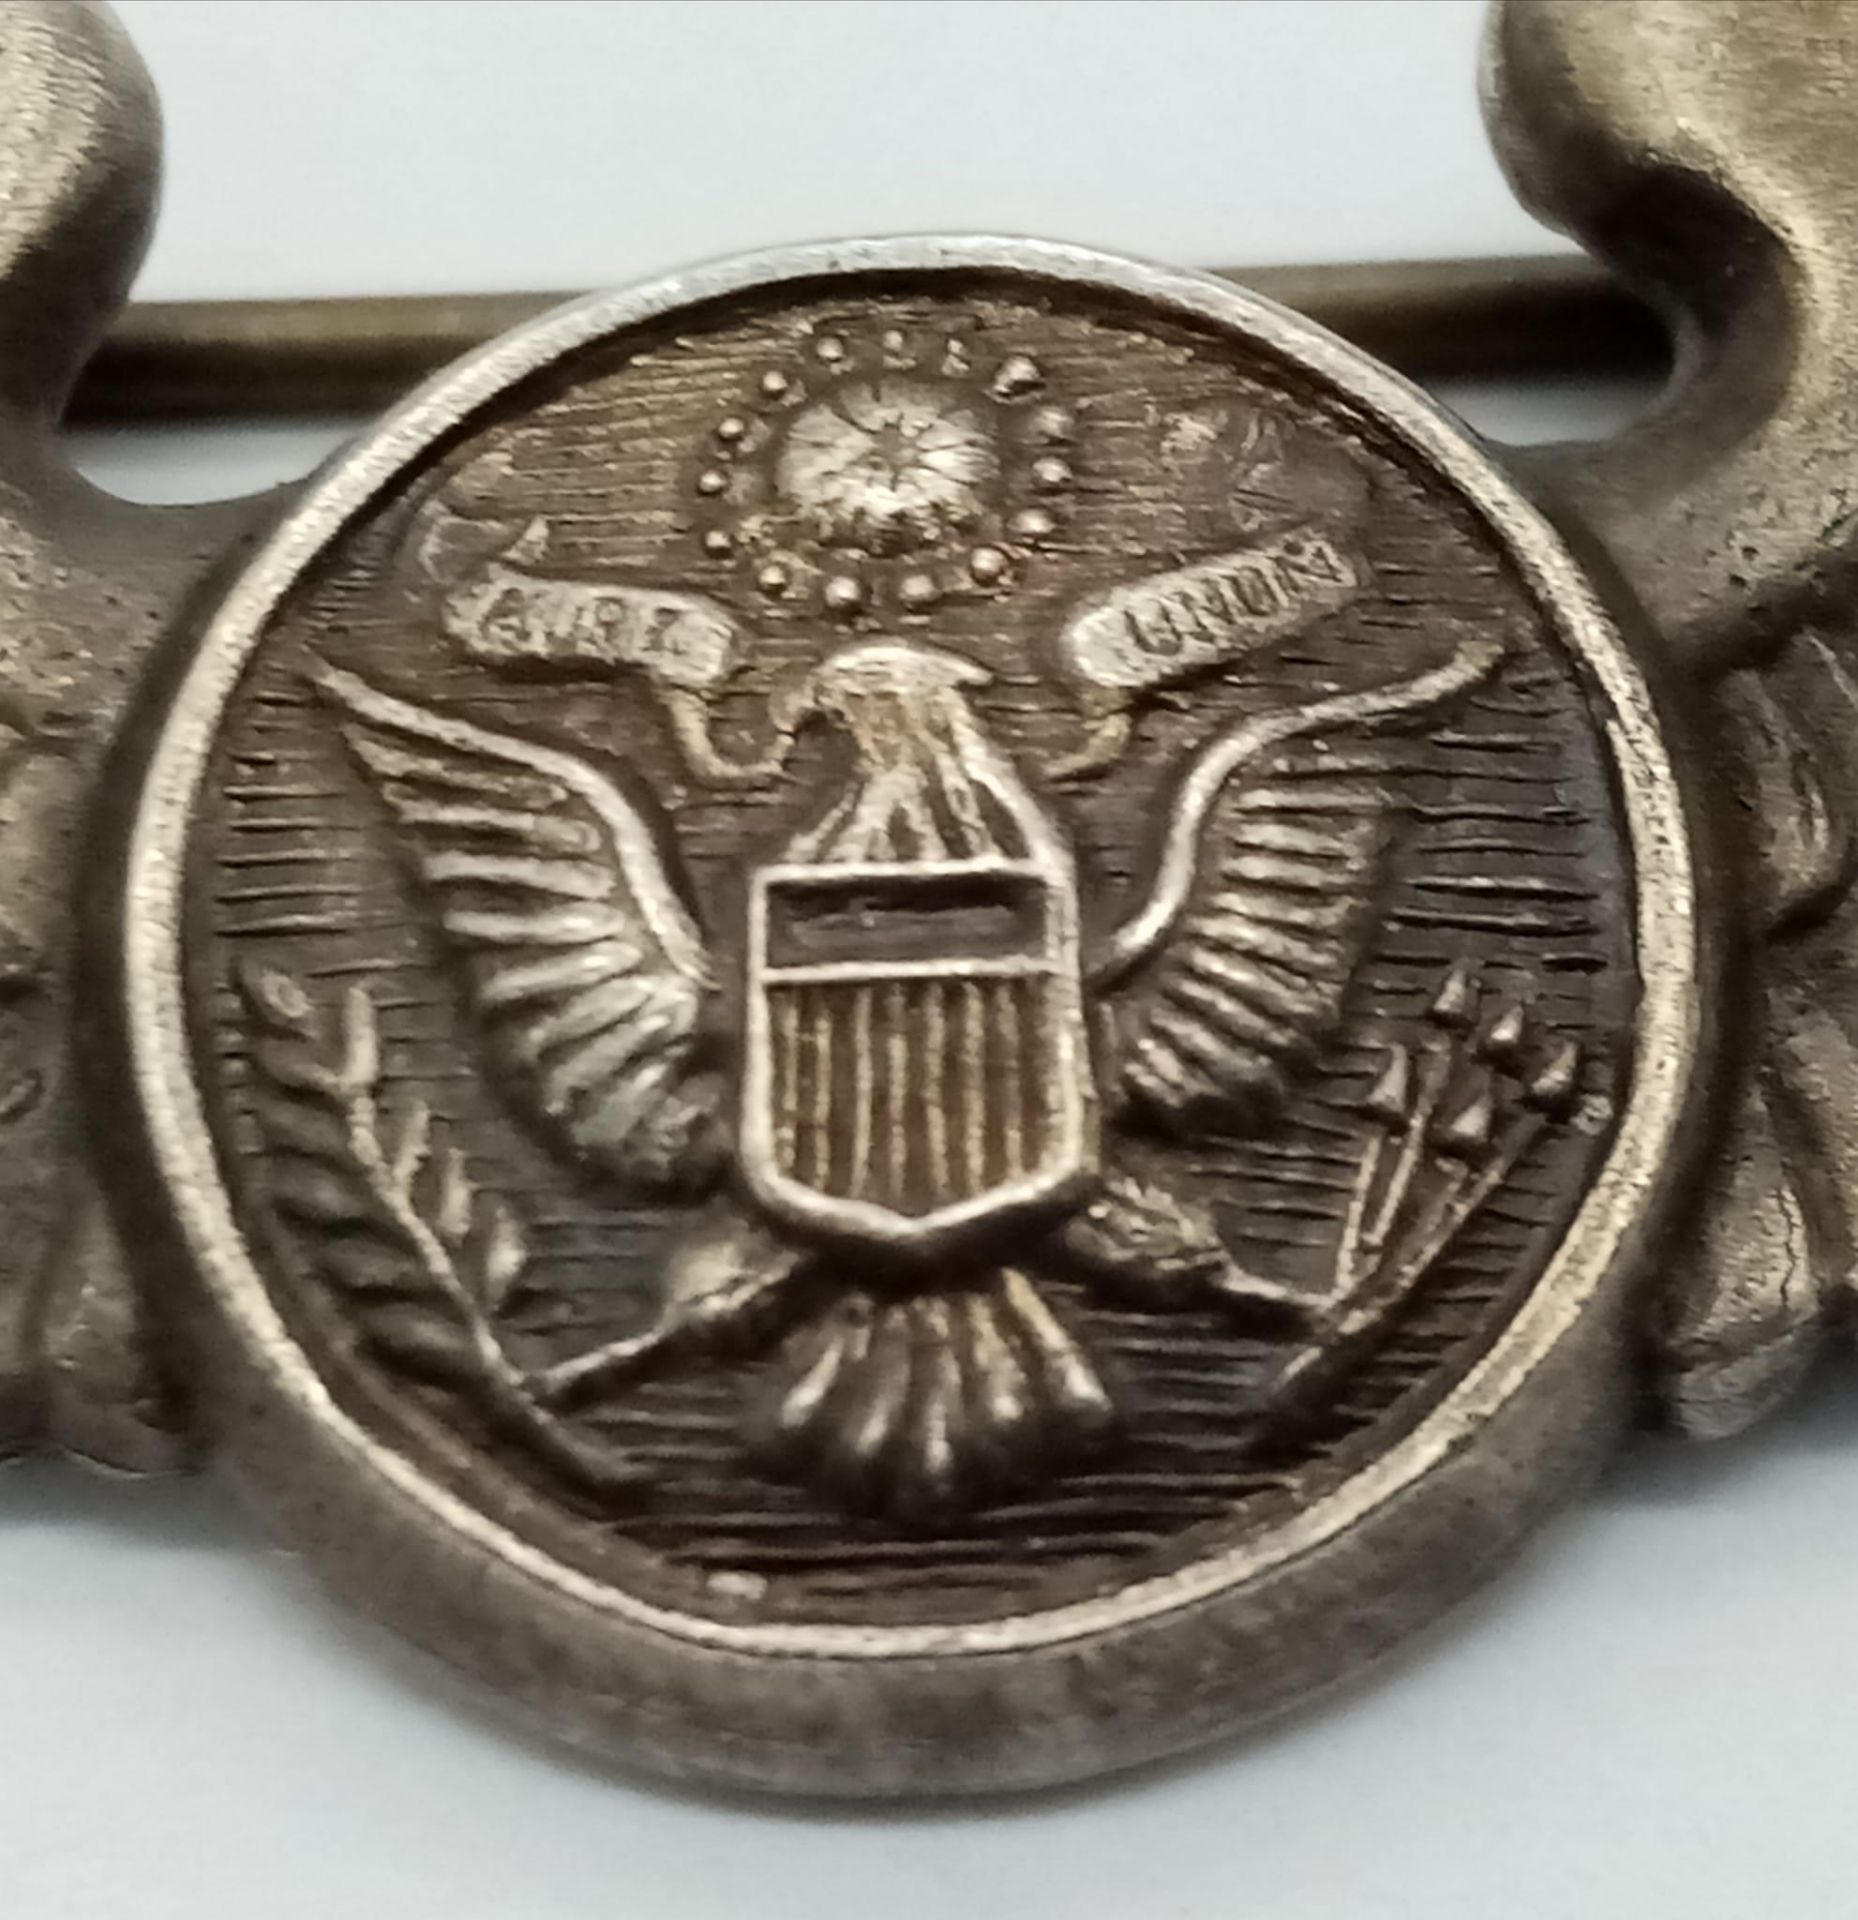 WW2 US Army Air Force Silver Crew Brevet Wings. Made by Wallace Bishop, Brisbane Australia - Image 3 of 3